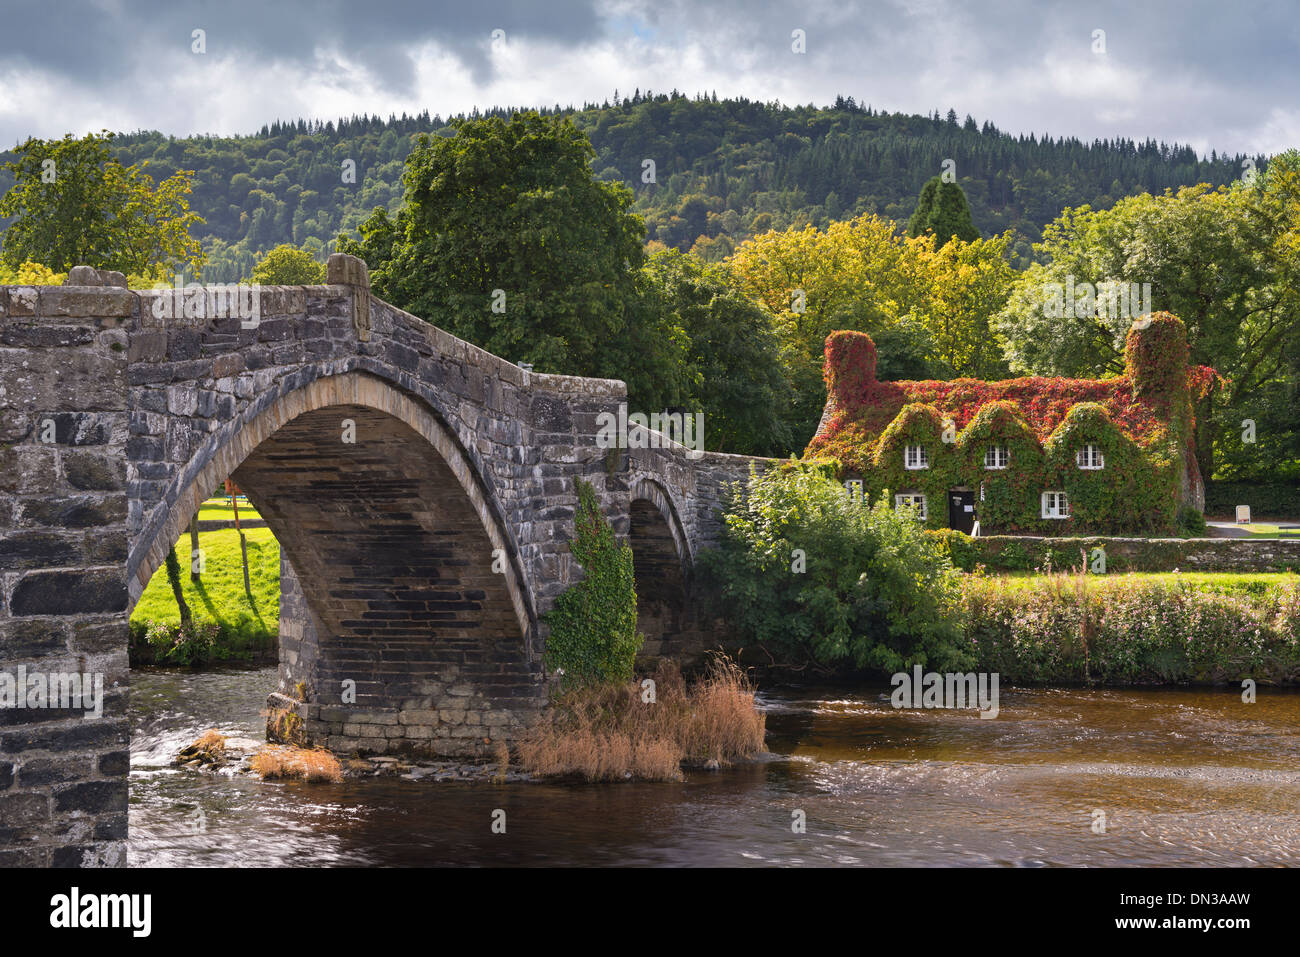 Ty Hwnt i'r Bont ivy covered cottage and tea rooms beside stone bridge crossing the River Conwy at Llanwrst, Snowdonia, Wales Stock Photo